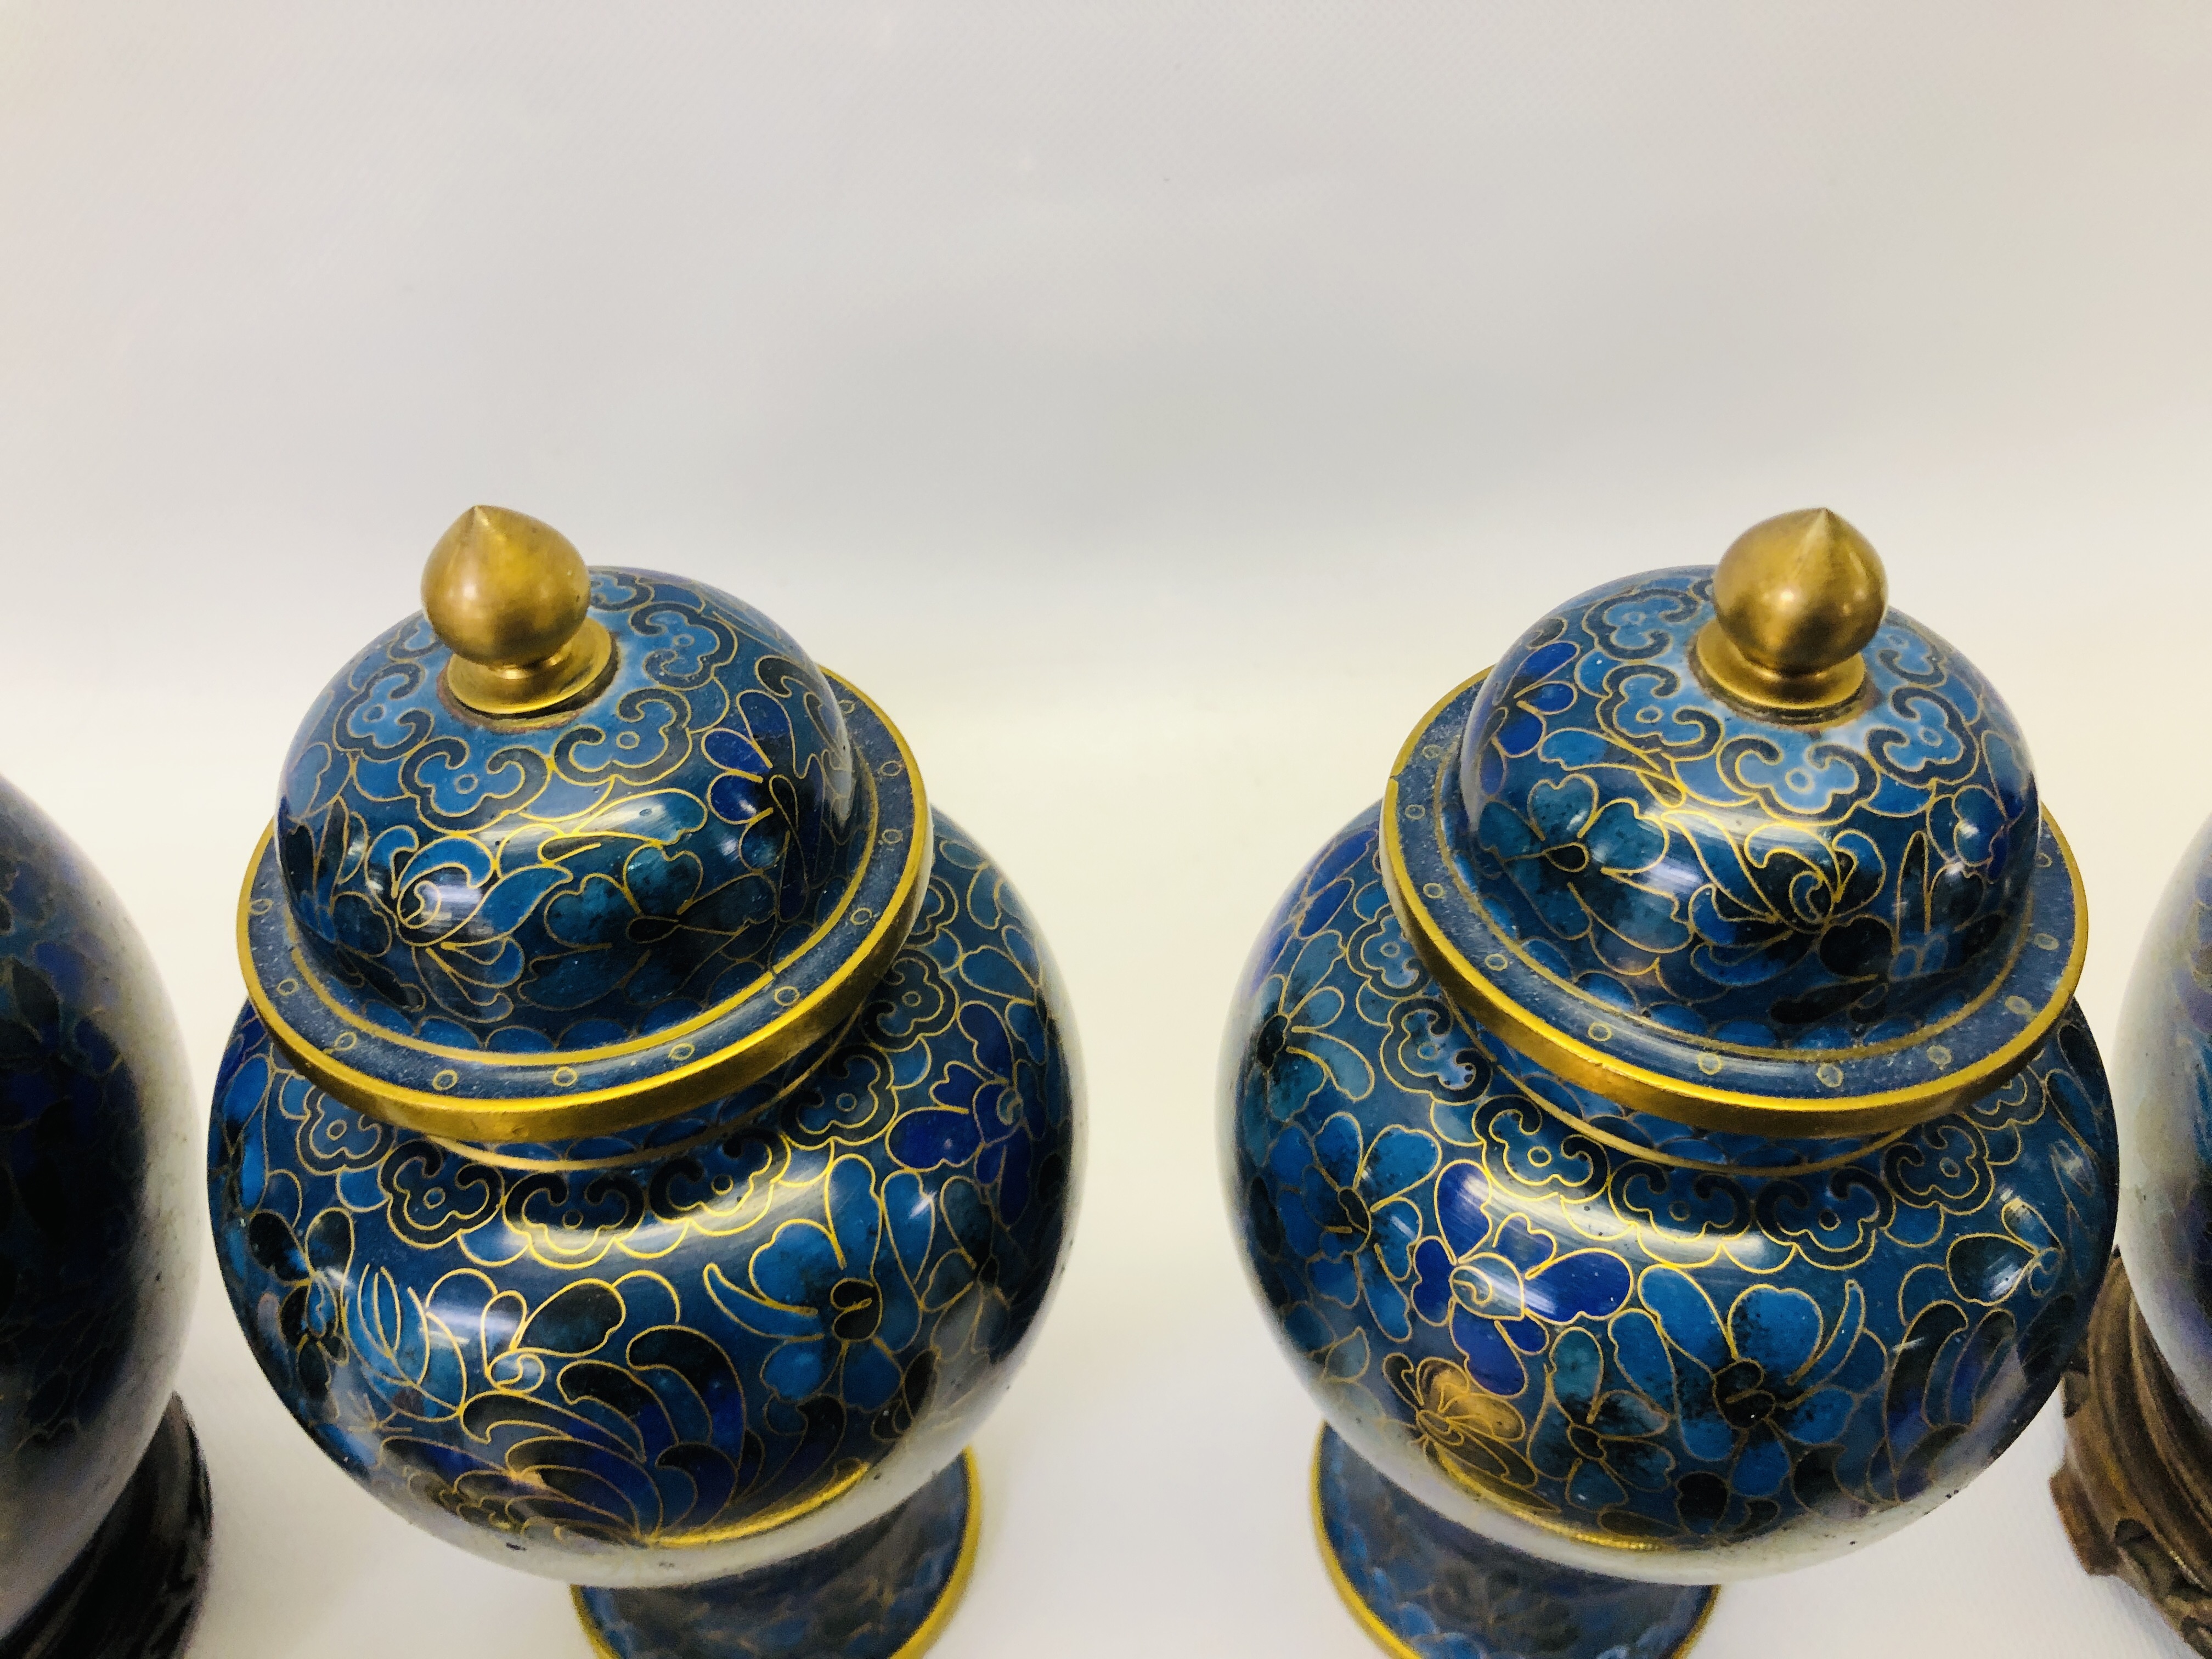 A PAIR OF ORIENTAL BRASS AND BLUE ENAMELLED CLOISONNE COVERED URNS H 20CM AND A PAIR OF MATCHING - Image 9 of 10